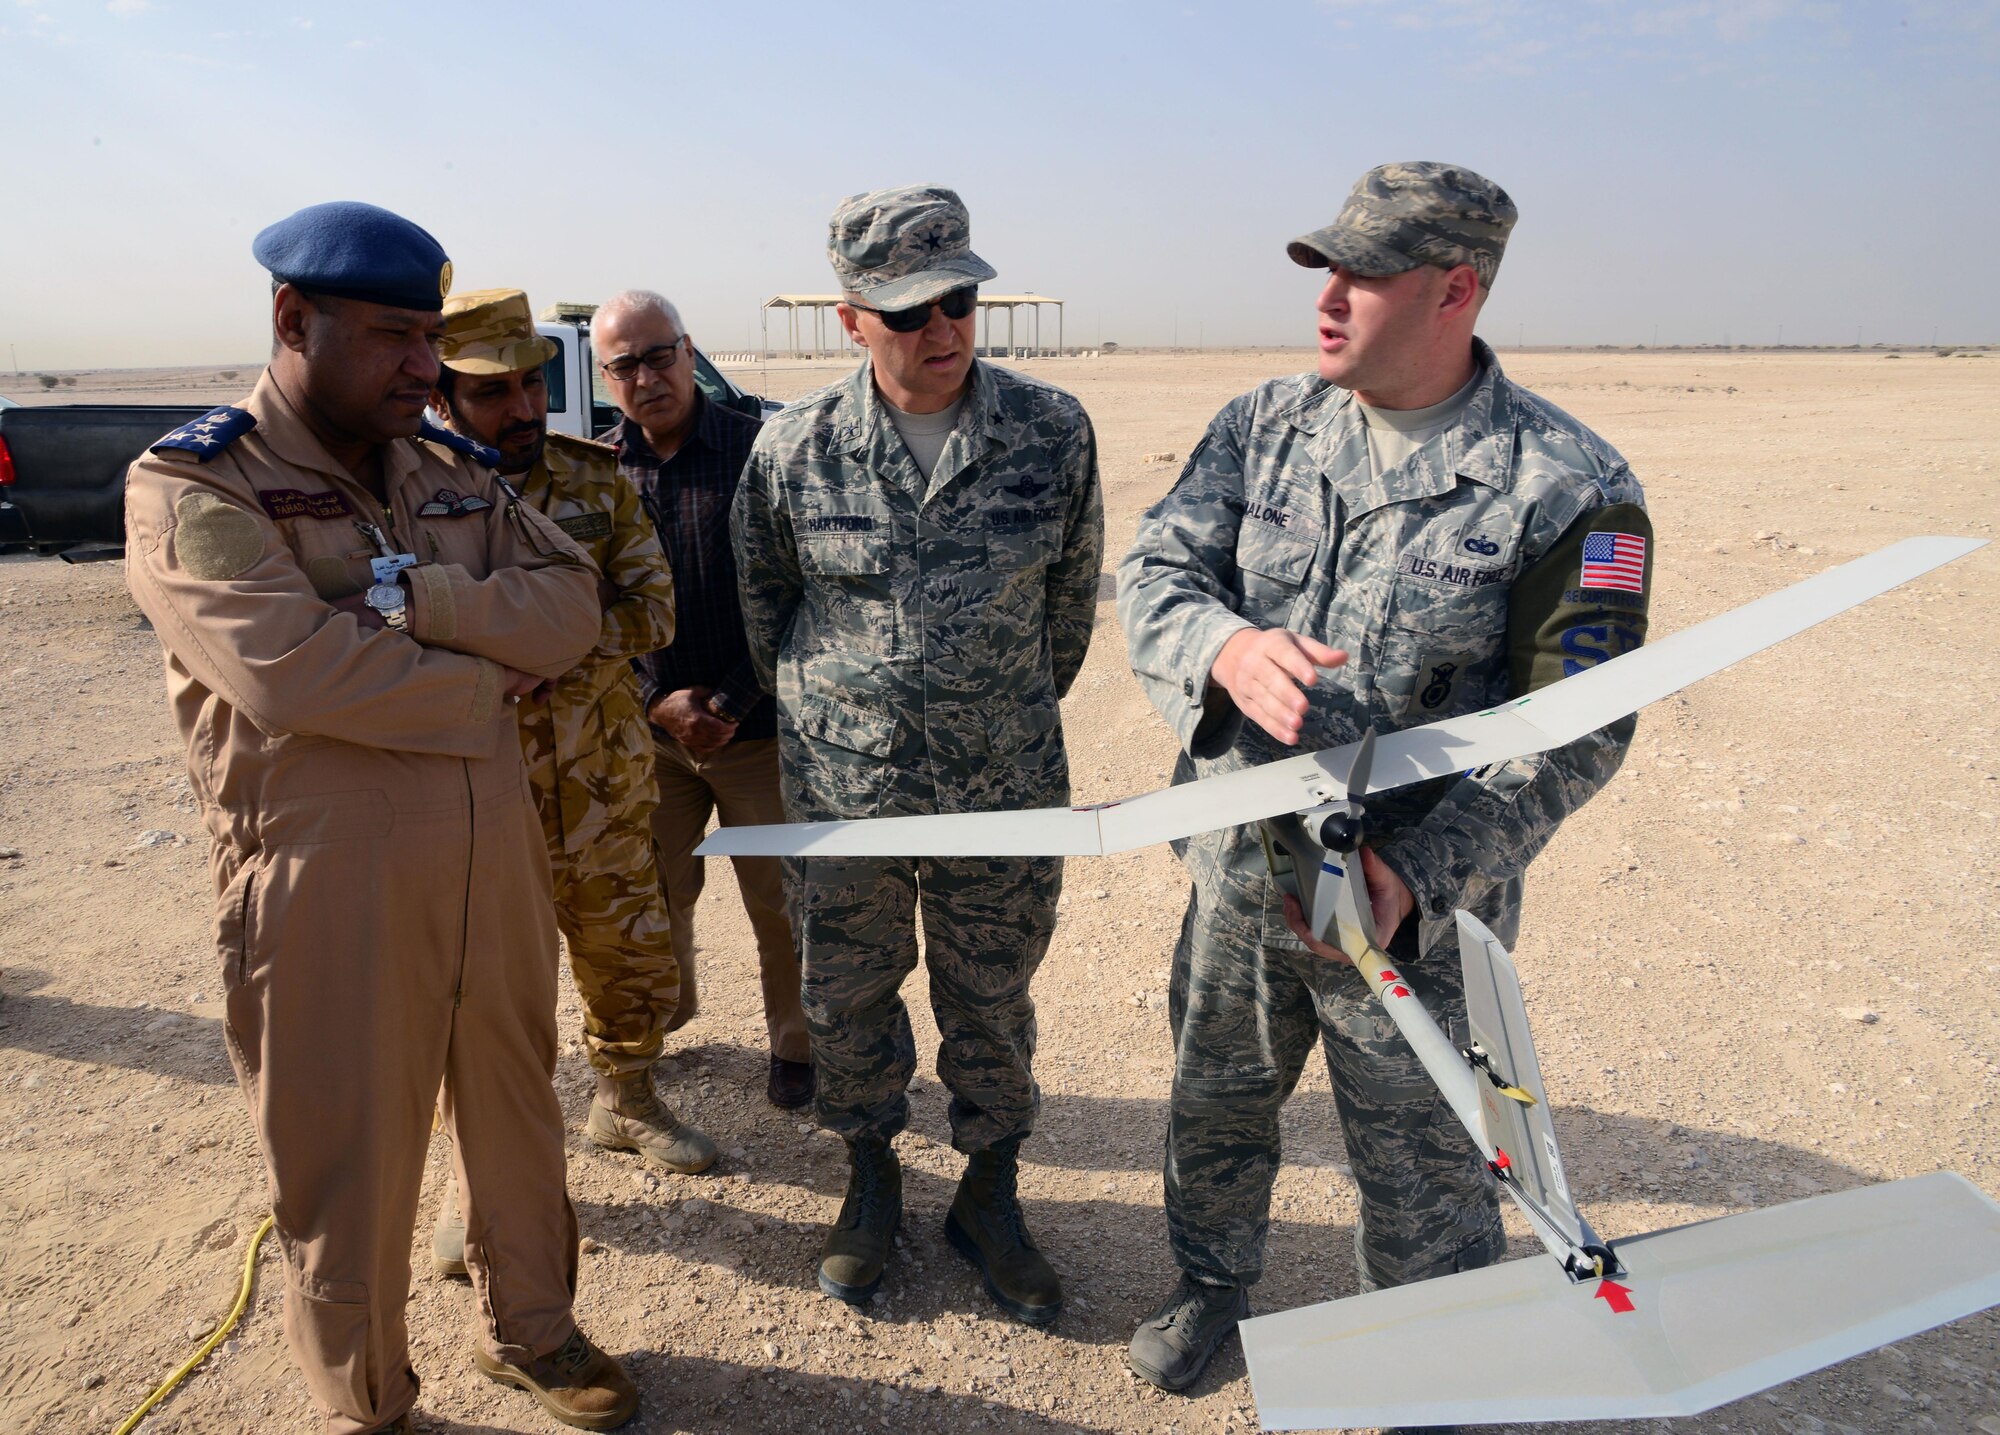 Tech. Sgt. Jeffery Malone, 379th Expeditionary Security Forces Squadron, briefs Qatari Brig. Gen.  Fahad Al-Eraik, the Al Udeid Air Base Commander and U.S. Air Force Brig. Gen. Darren Hartford, 379th Air Expeditionary Wing commander on the capability of the R-11B Raven during an aerial demonstration at Al Udeid AB, Qatar, March 4, 2015.  The RQ-11 Raven is a lightweight unmanned aircraft system that’s designed for rapid deployment and high-mobility for military operations. At Al Udeid, security forces Airmen use the Raven to support anti-terrorism measures like day or night aerial intelligence, surveillance, target acquisition, and reconnaissance. This is the first time since 2005 that the Raven has been used at Al Udeid. (Air Force photo by Master Sgt. Kerry Jackson) 